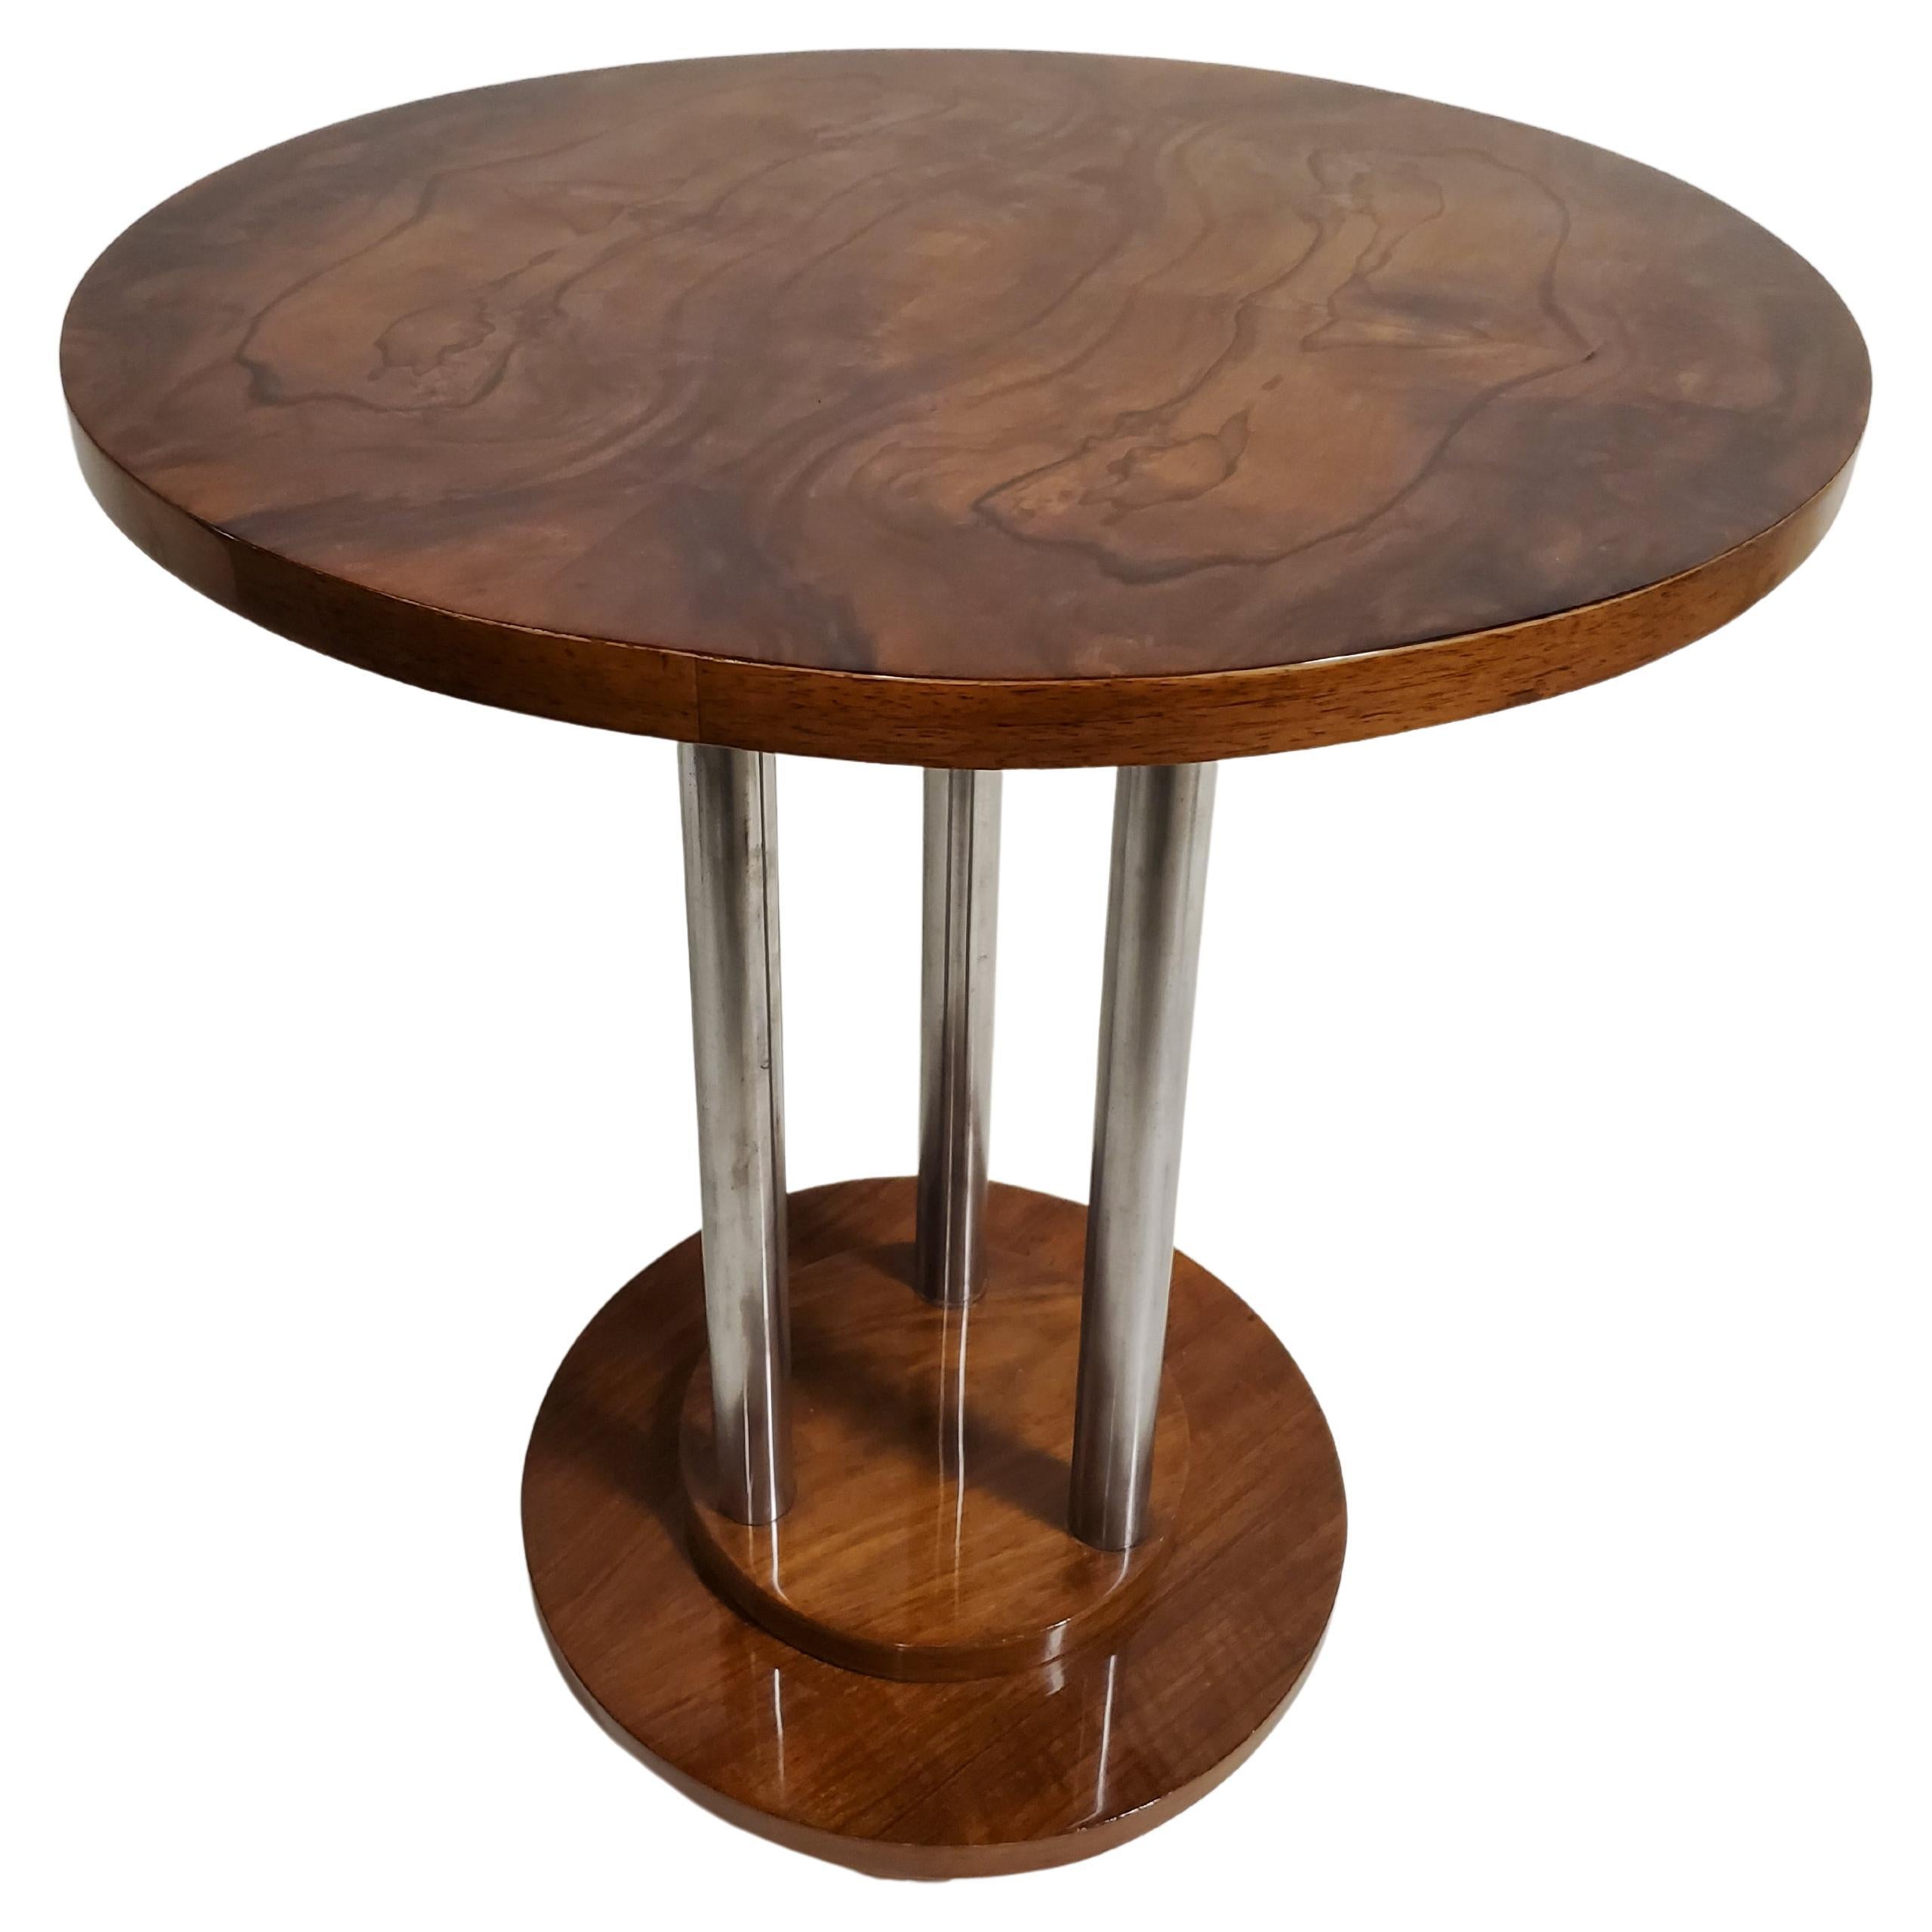 A French Art Deco walnut side table highlighted by nickeled metal accents. Three tubular metal poles support a beautifully grained, book matched circular wood top with an organic fully grained pattern, that rest on a circular stepped base ending